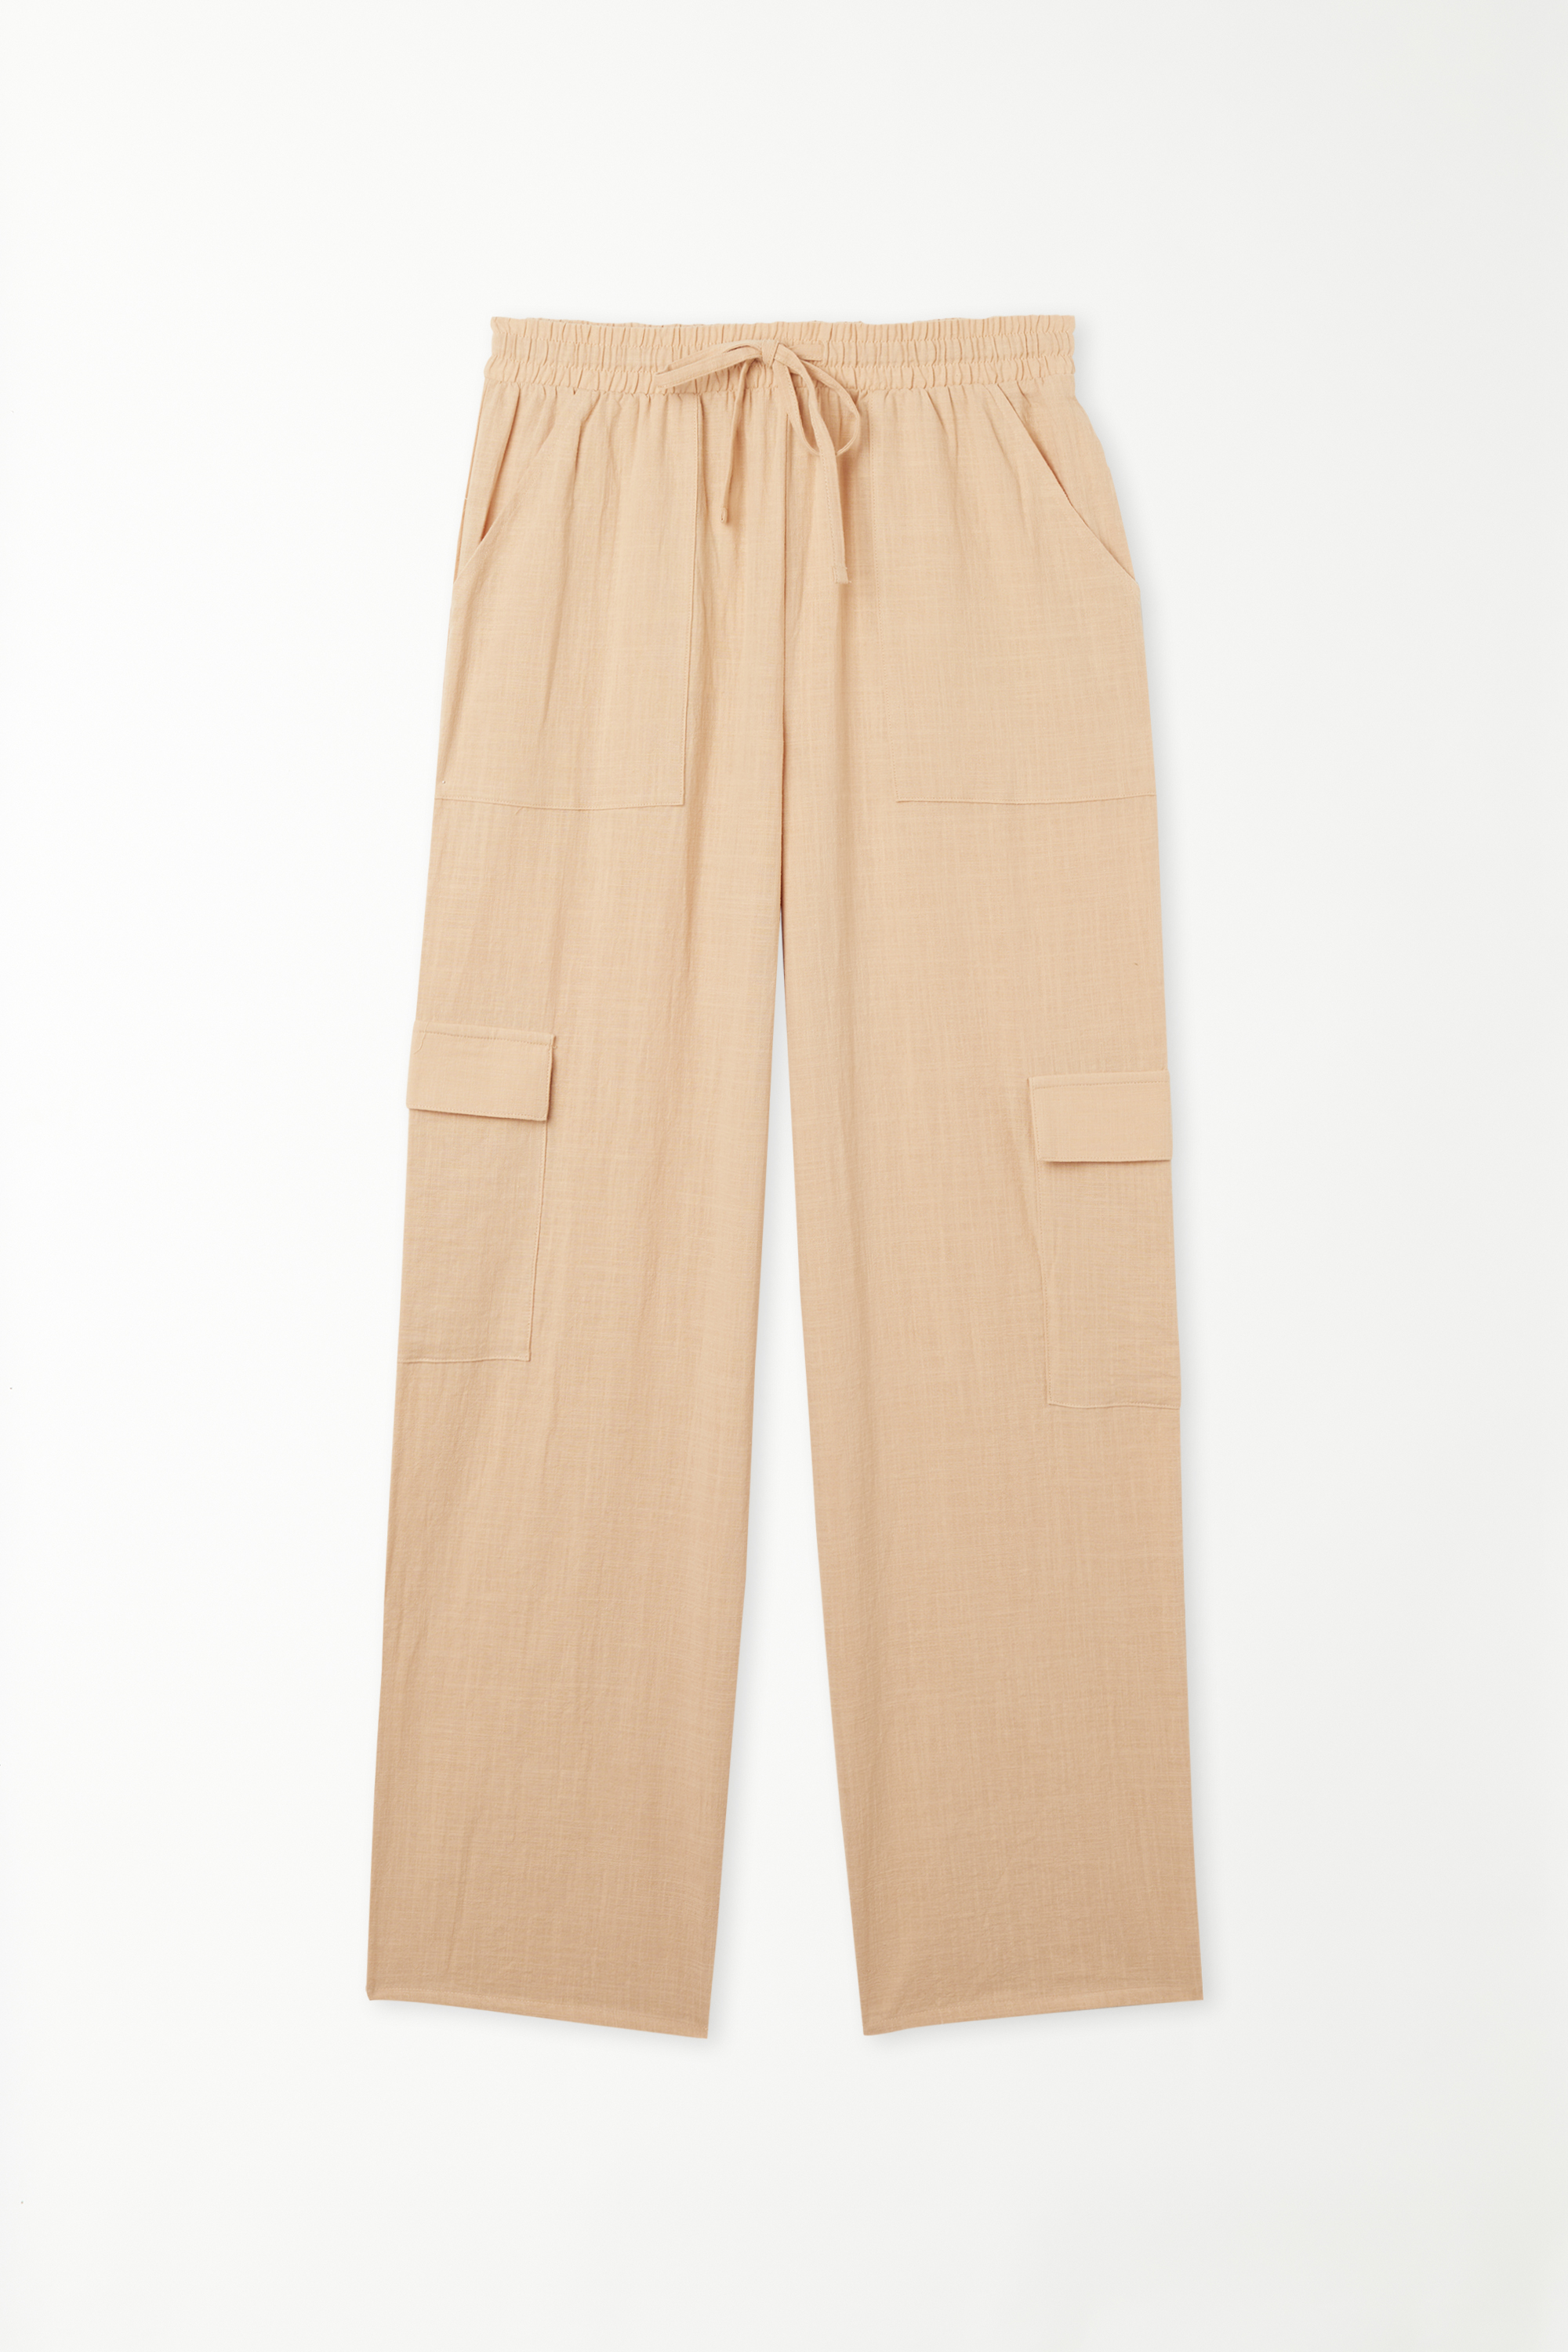 Super Light Cotton Trousers with Cargo Pockets